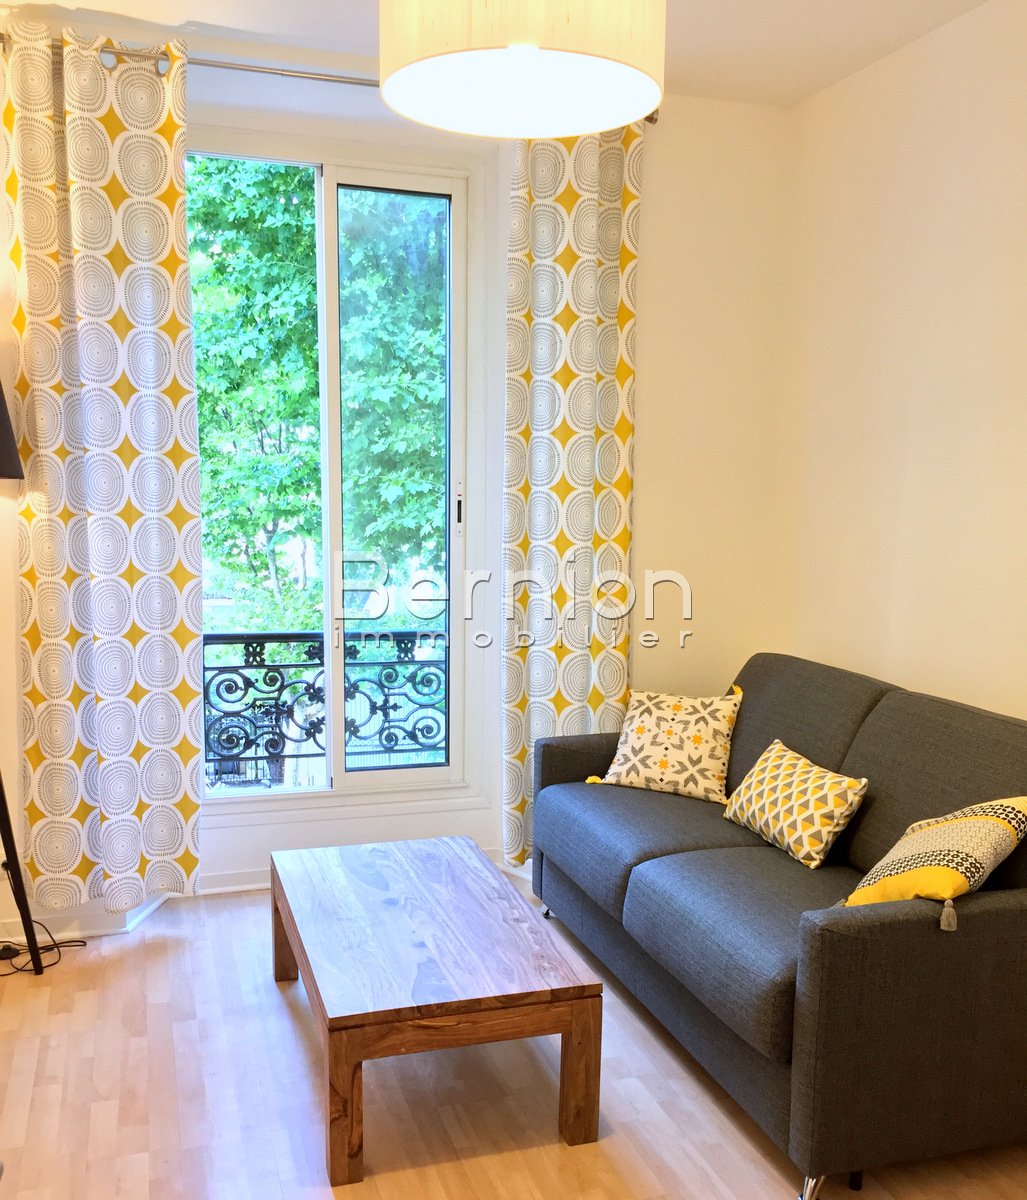 For Rent Nice City Center Studio Apartment Bd Carabacel Ipag / photo 3